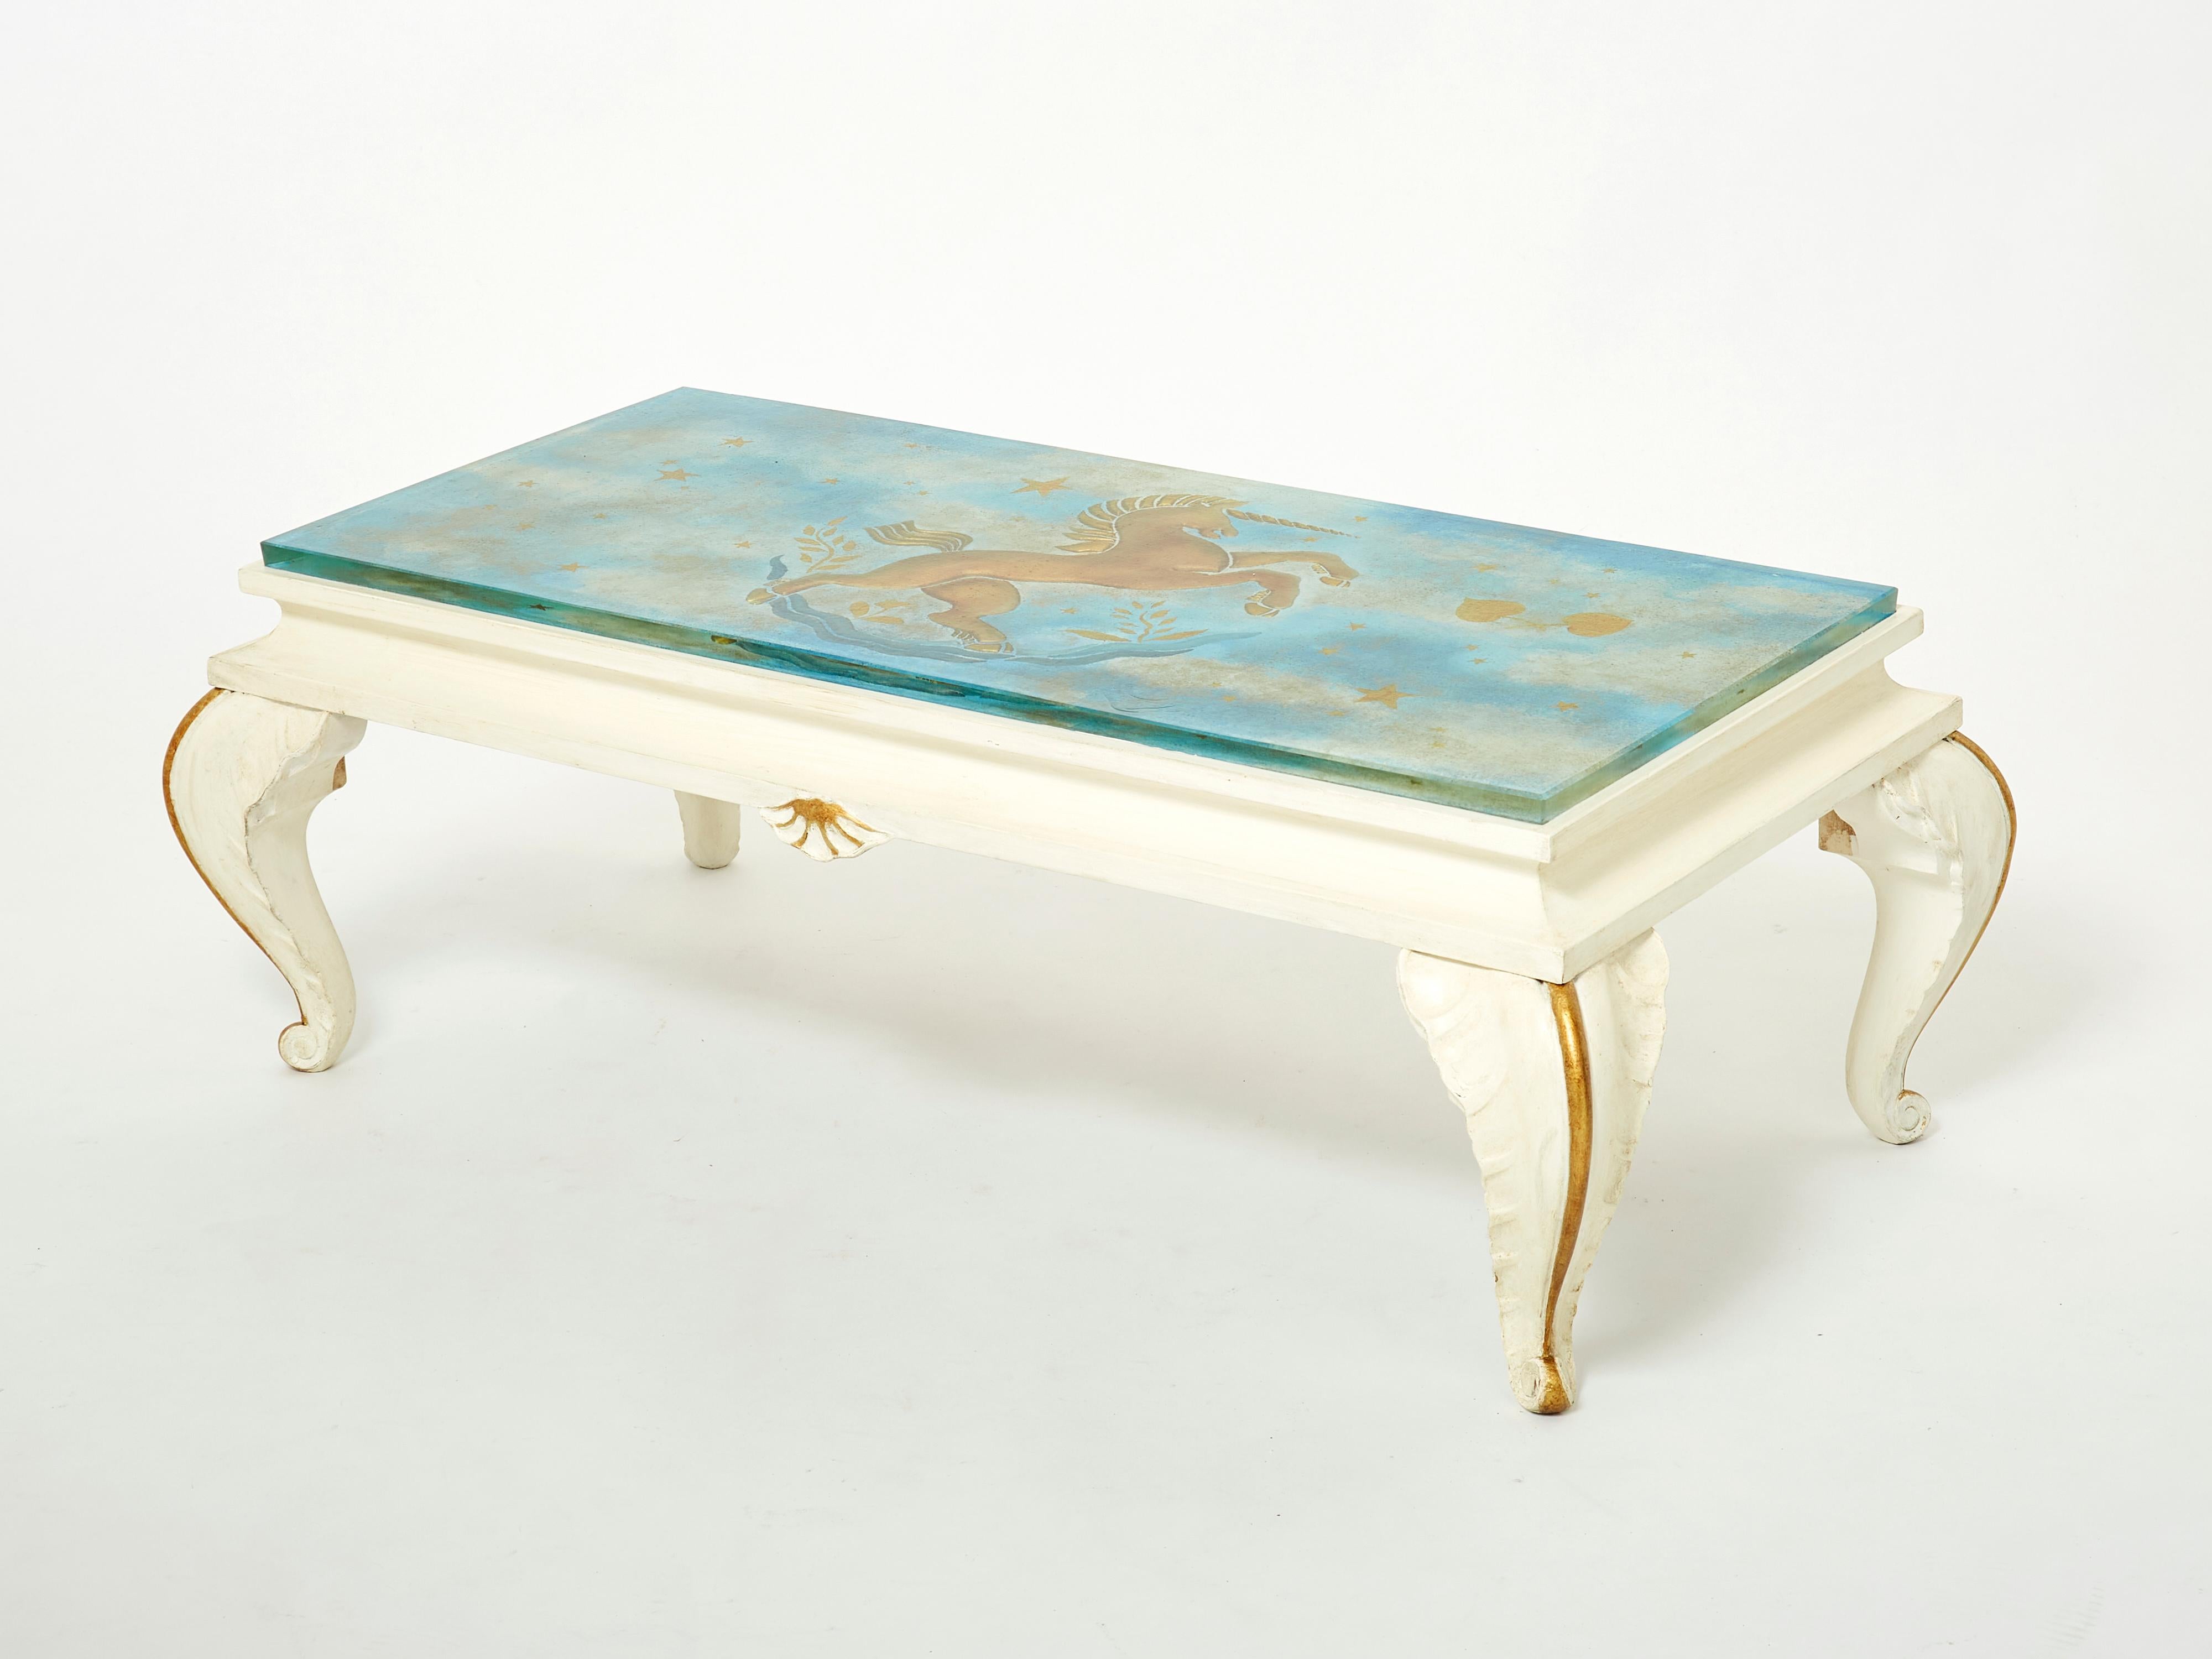 Maison Jansen Gilded Wood Painted Glass Top Coffee Table, 1950 For Sale 3